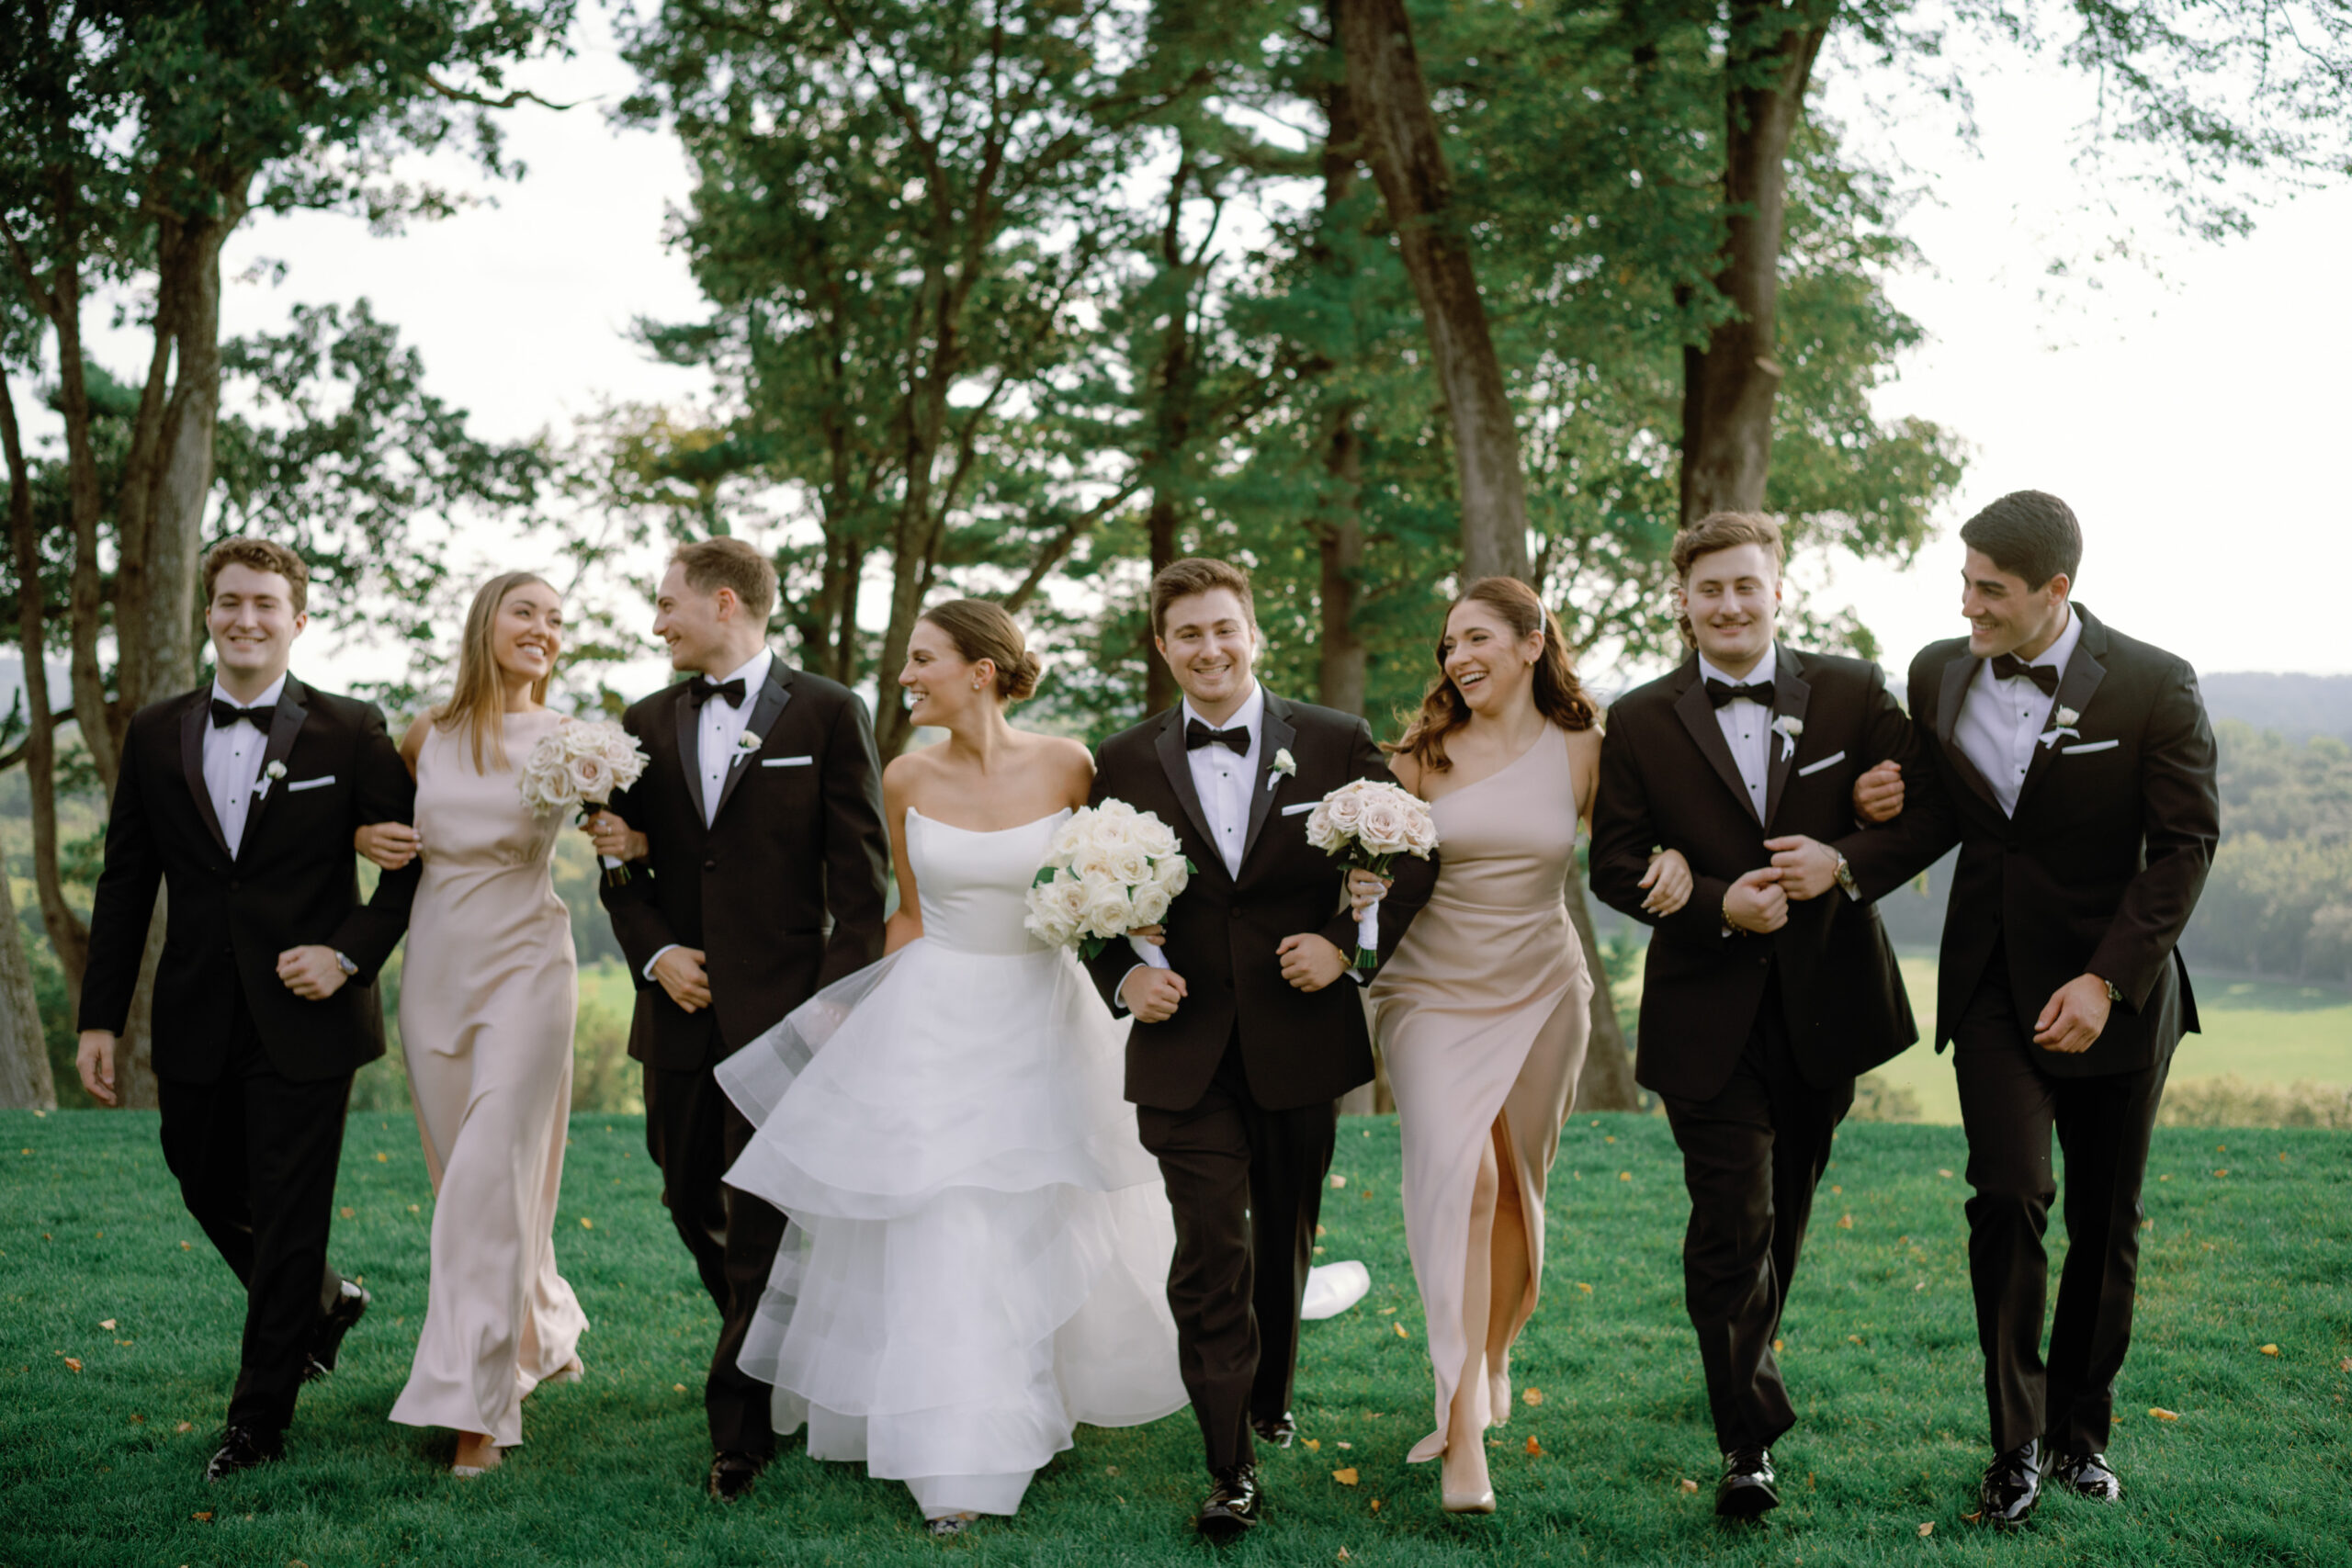 Editorial photo of the newlyweds, bridesmaids and groomsmen walking outdoors. Image by Jenny Fu Studio